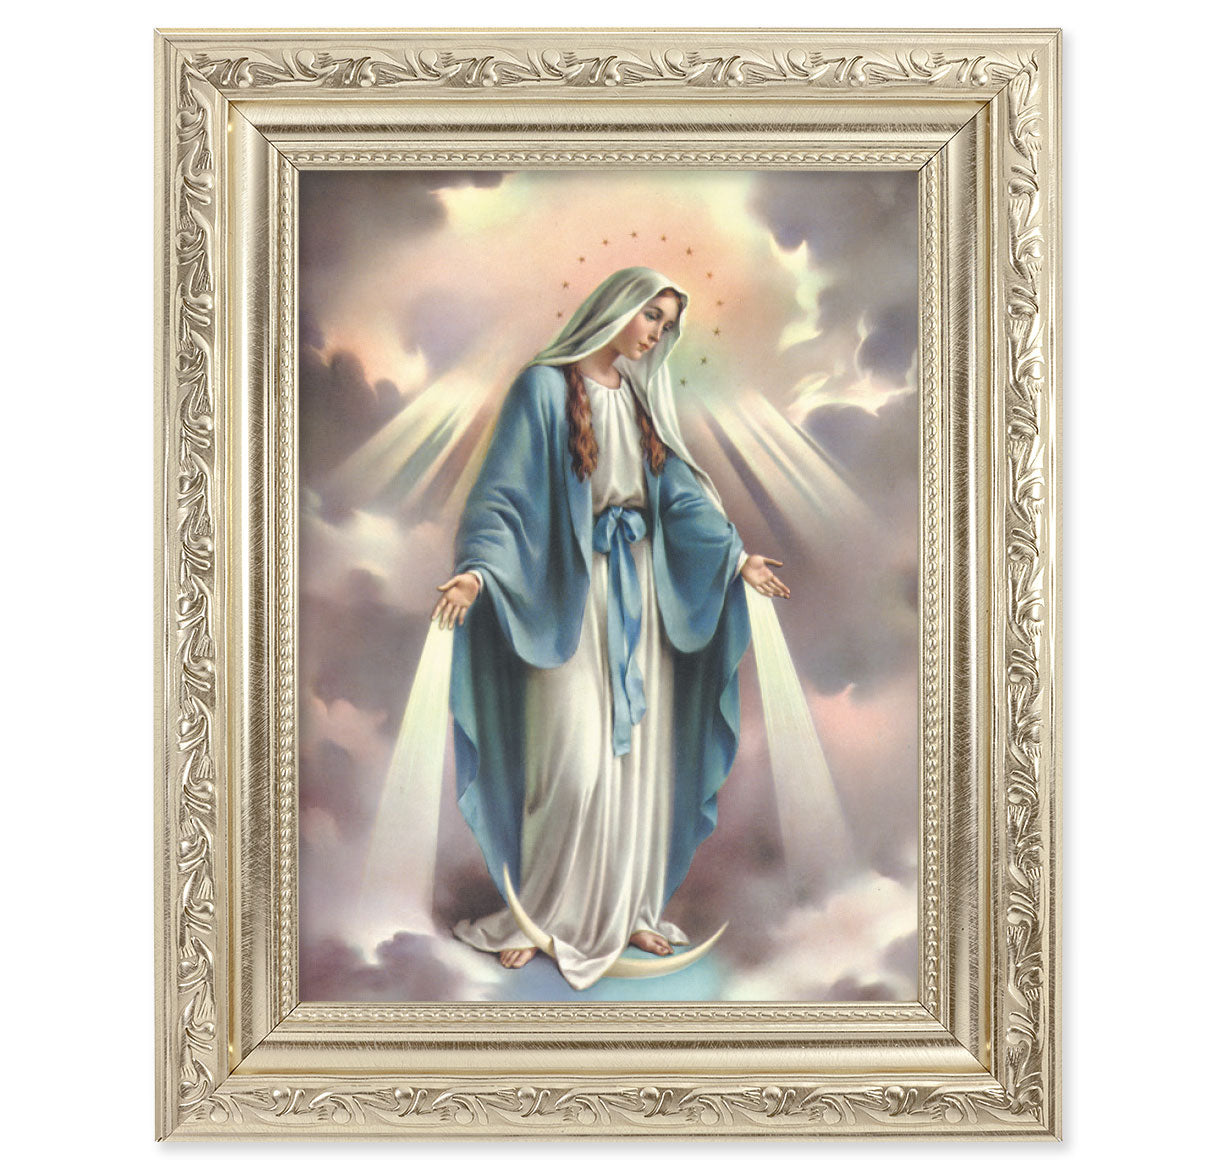 Our Lady of Grace Silver Framed Art